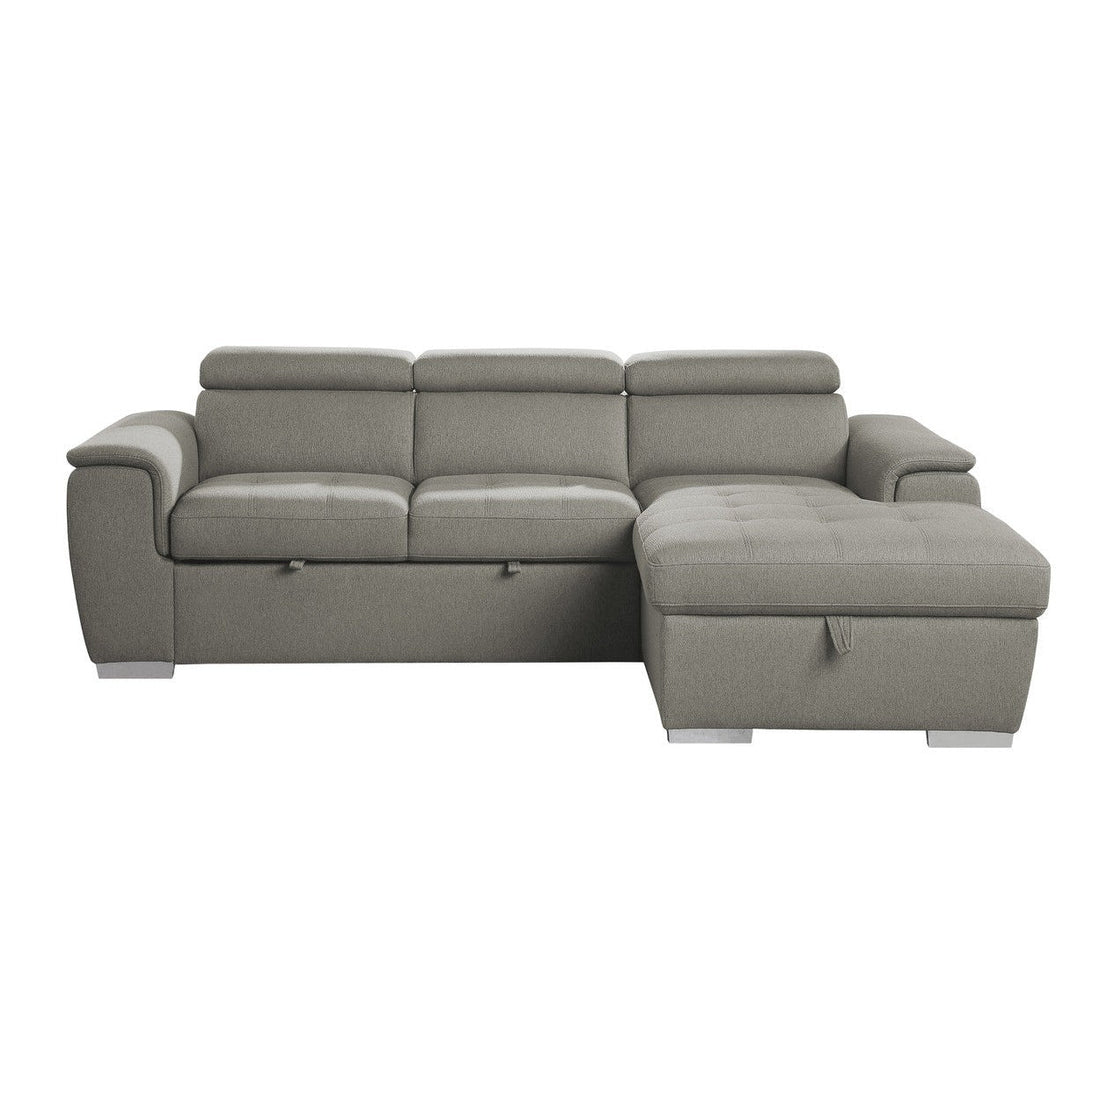 (2)2-Piece Sectional with Pull-out Bed and Adjustable Headrests 9355BR*22LRC